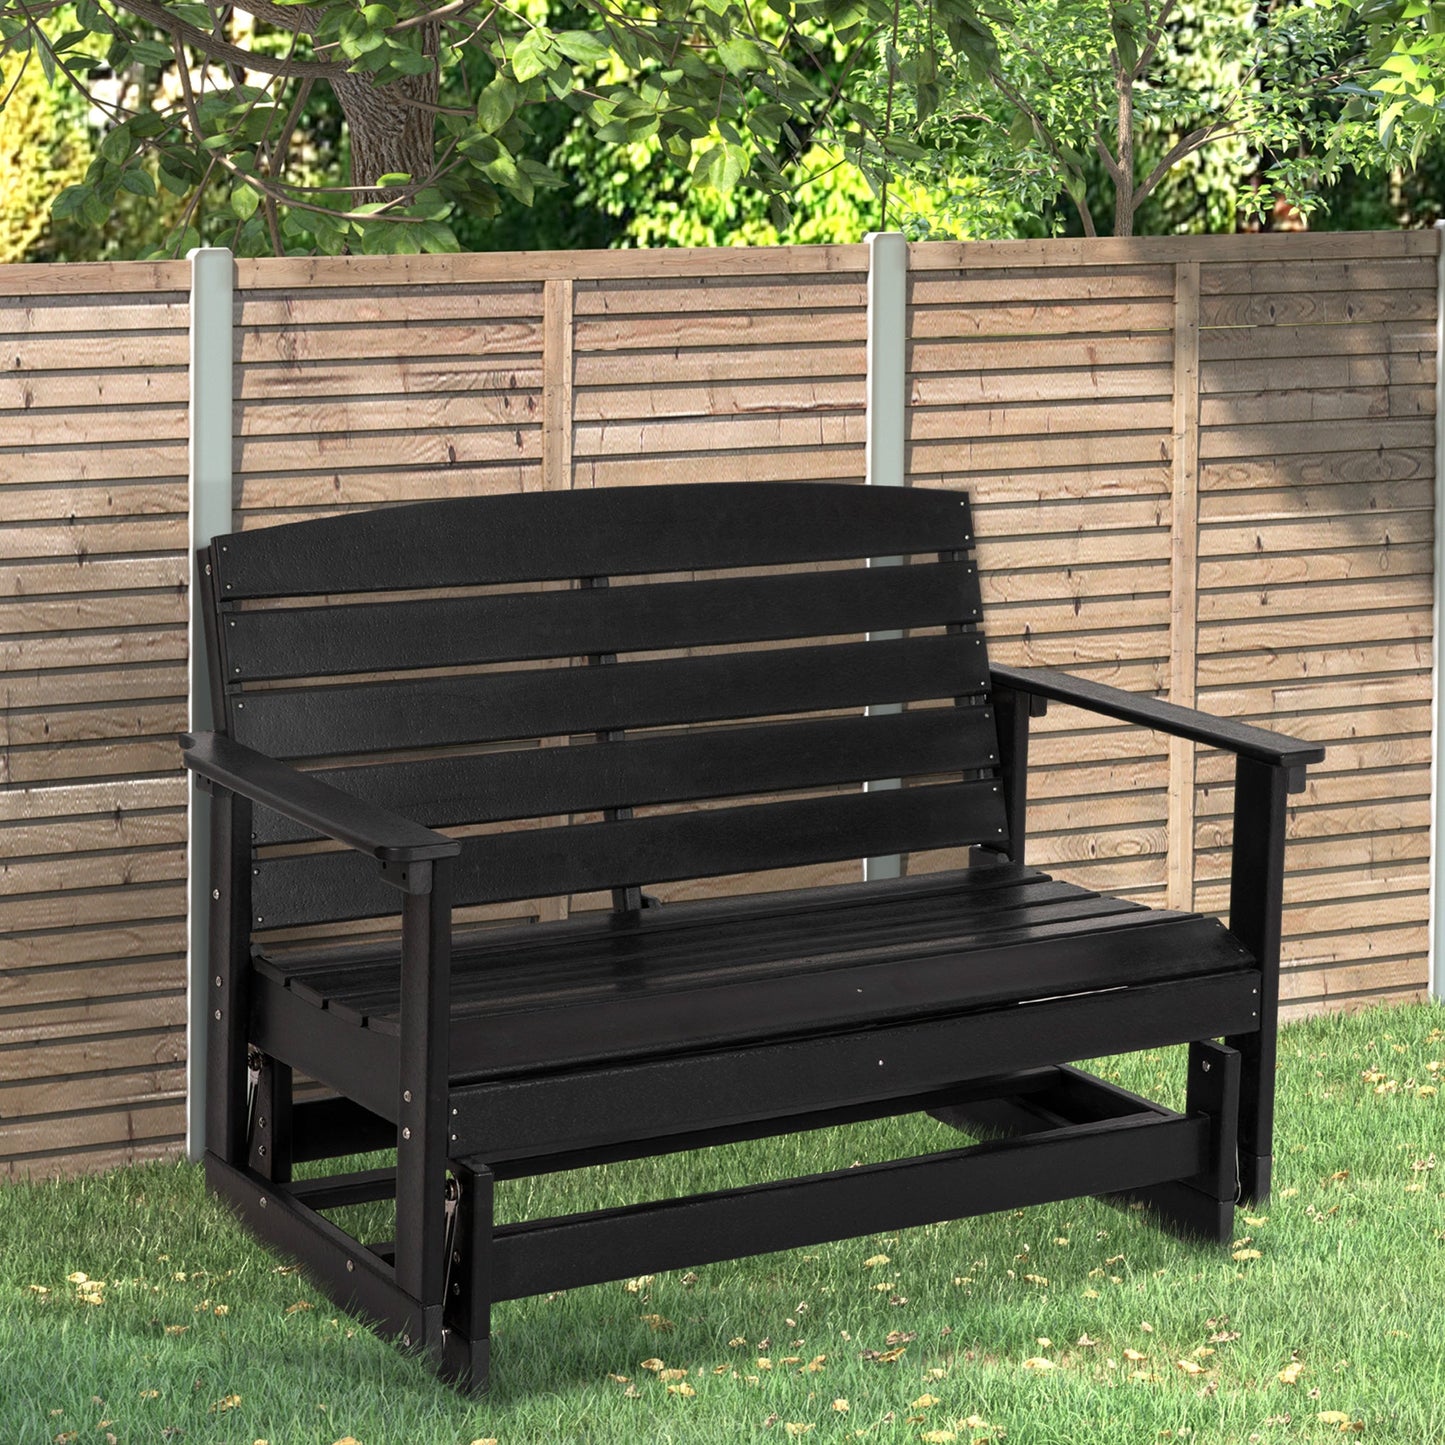 -Outsunny Patio Glider Bench w/ HDPE Slatted Double Rocking Chair, Black - Outdoor Style Company